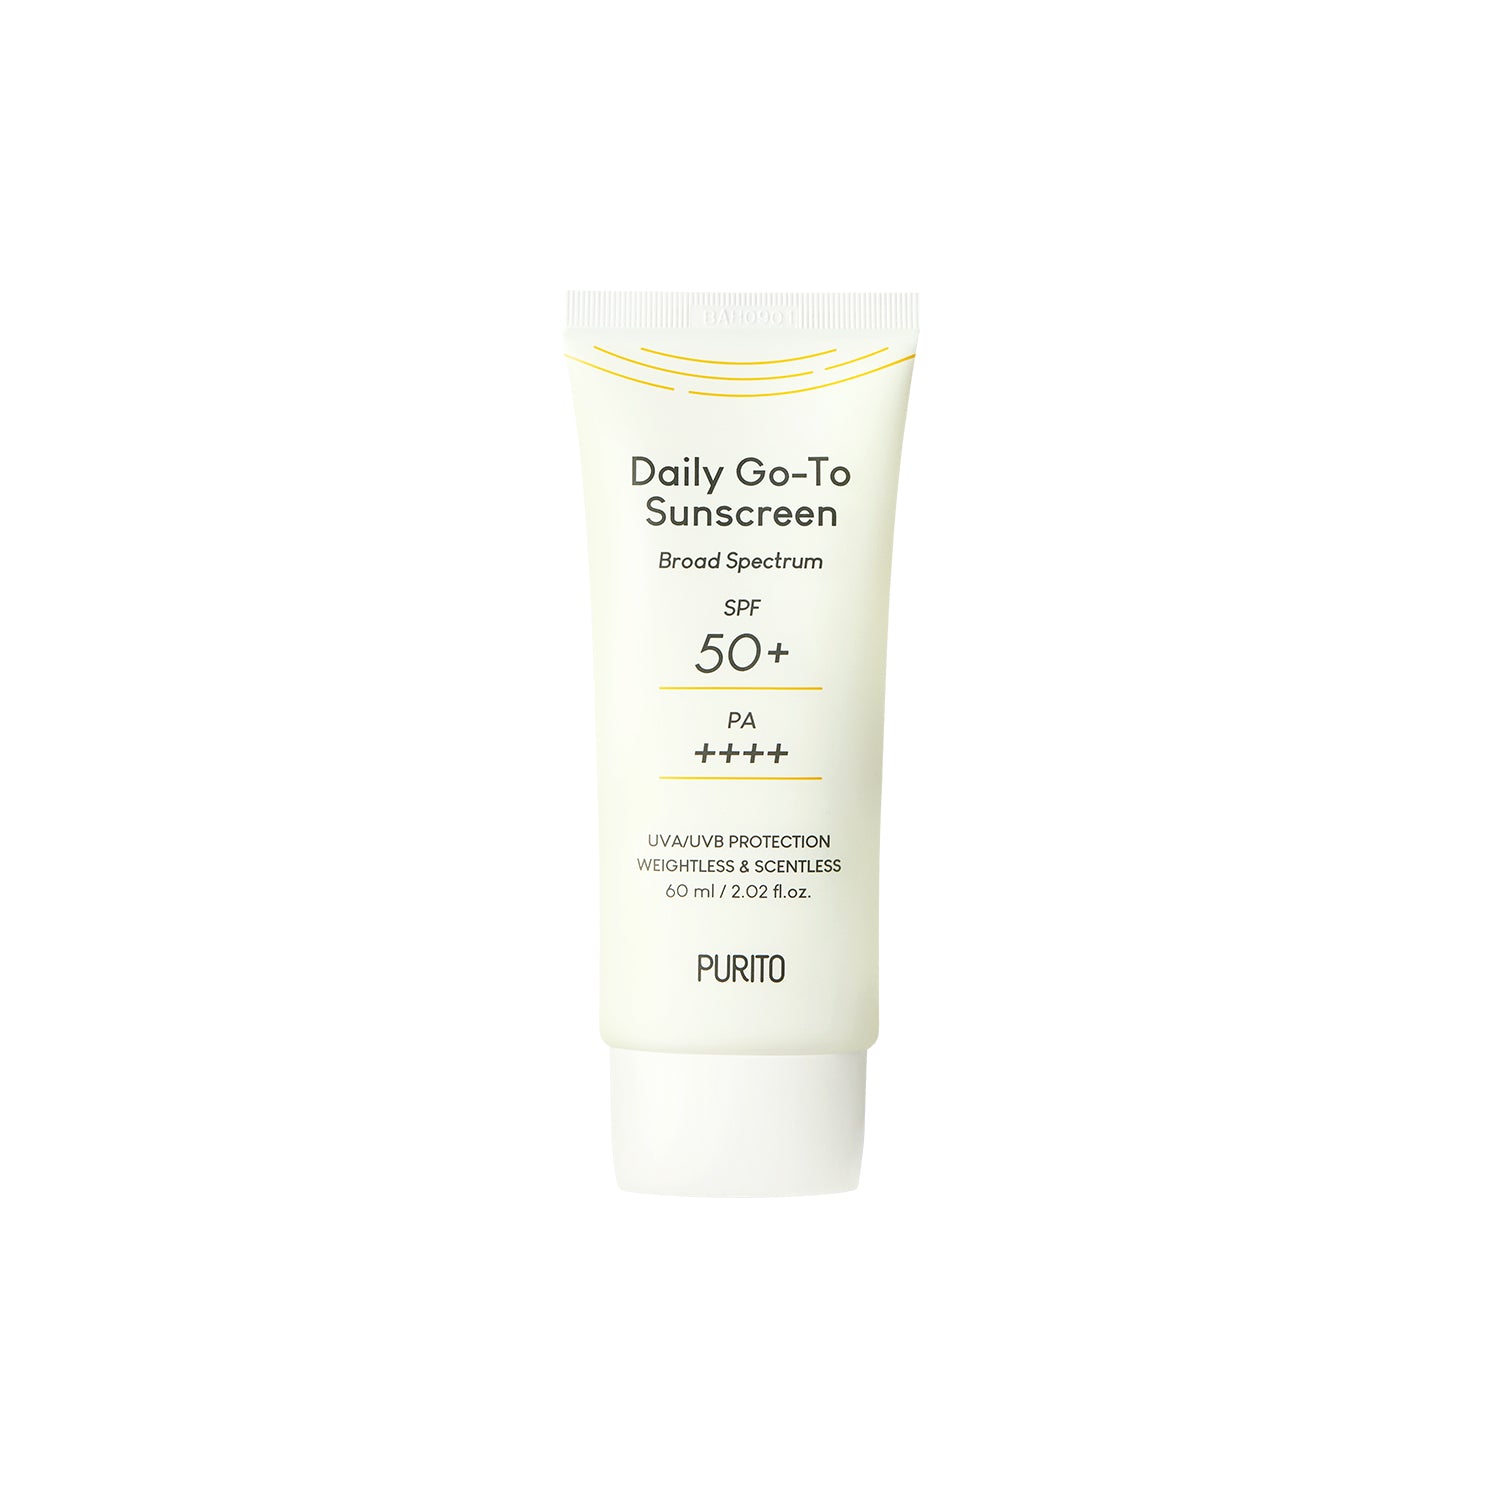 Daily Go-To Sunscreen